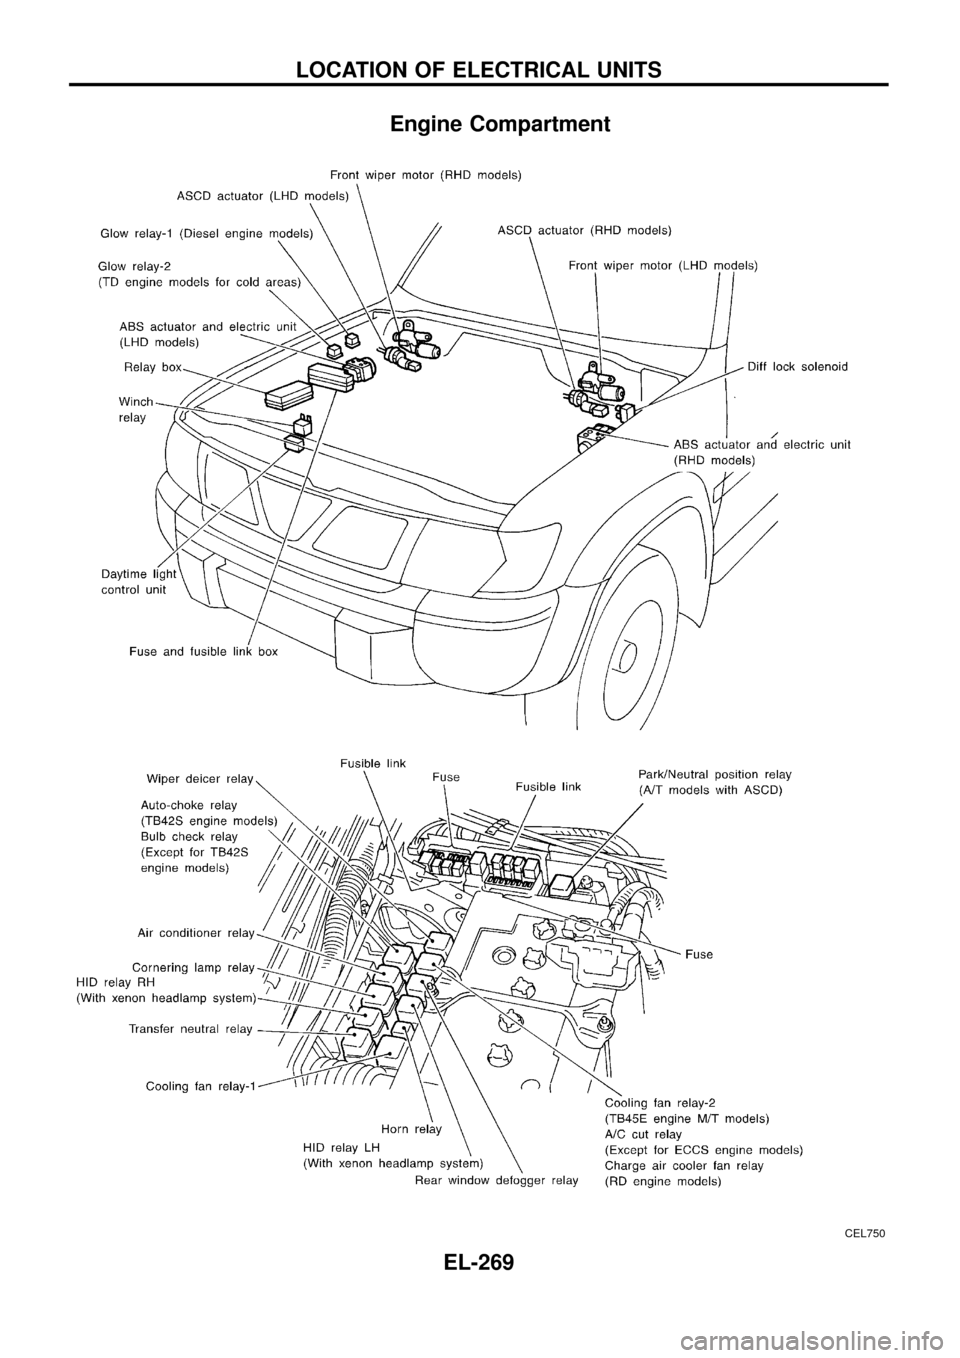 NISSAN PATROL 1998 Y61 / 5.G Electrical System Service Manual Engine Compartment
CEL750
LOCATION OF ELECTRICAL UNITS
EL-269 